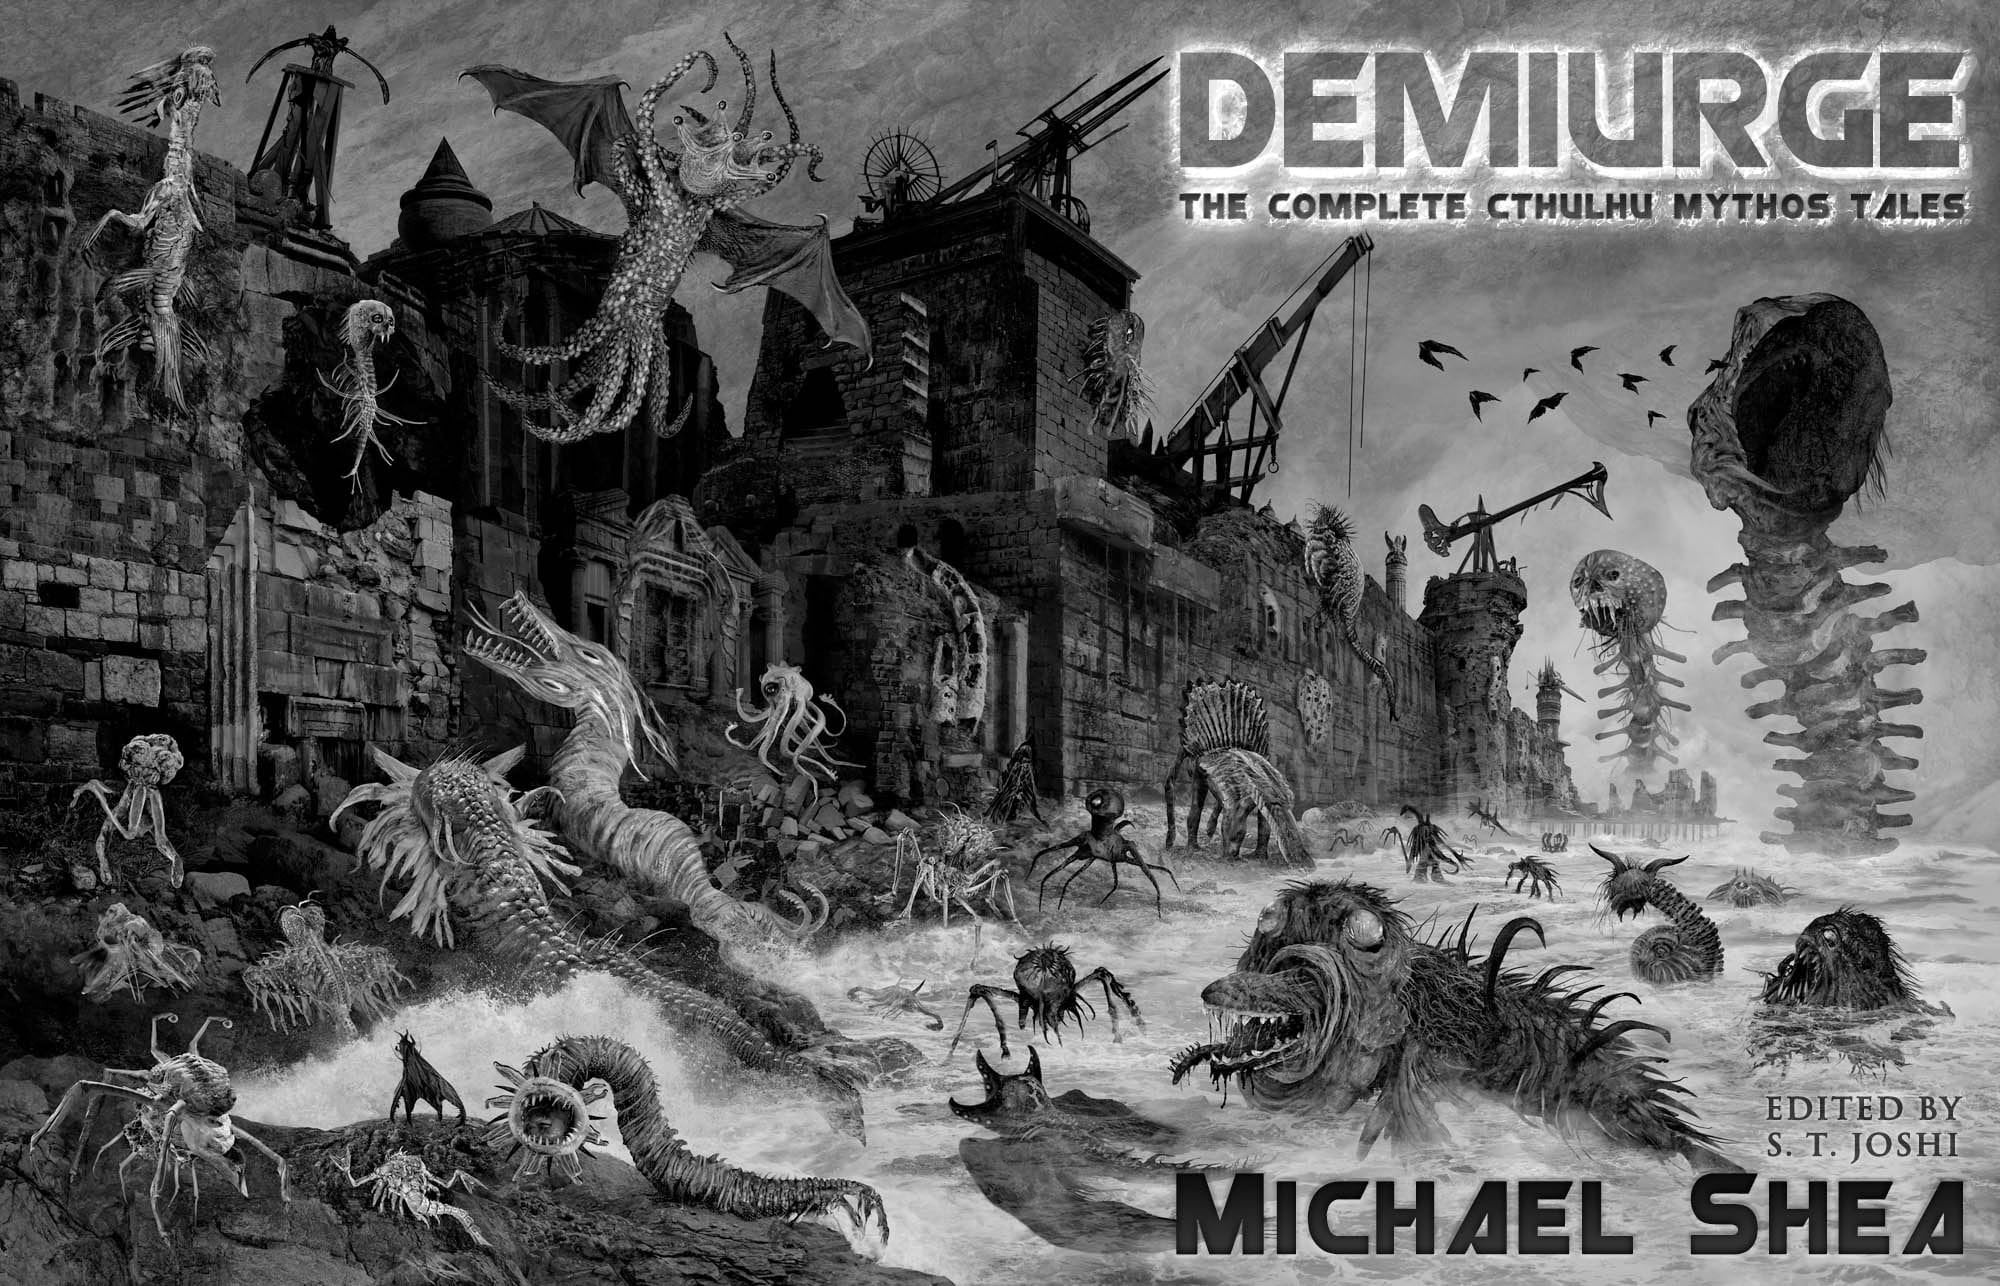 Exclusive Collectors Club Signed Hardcover of Demiurge: The Complete Cthulhu Mythos Tales of Michael Shea